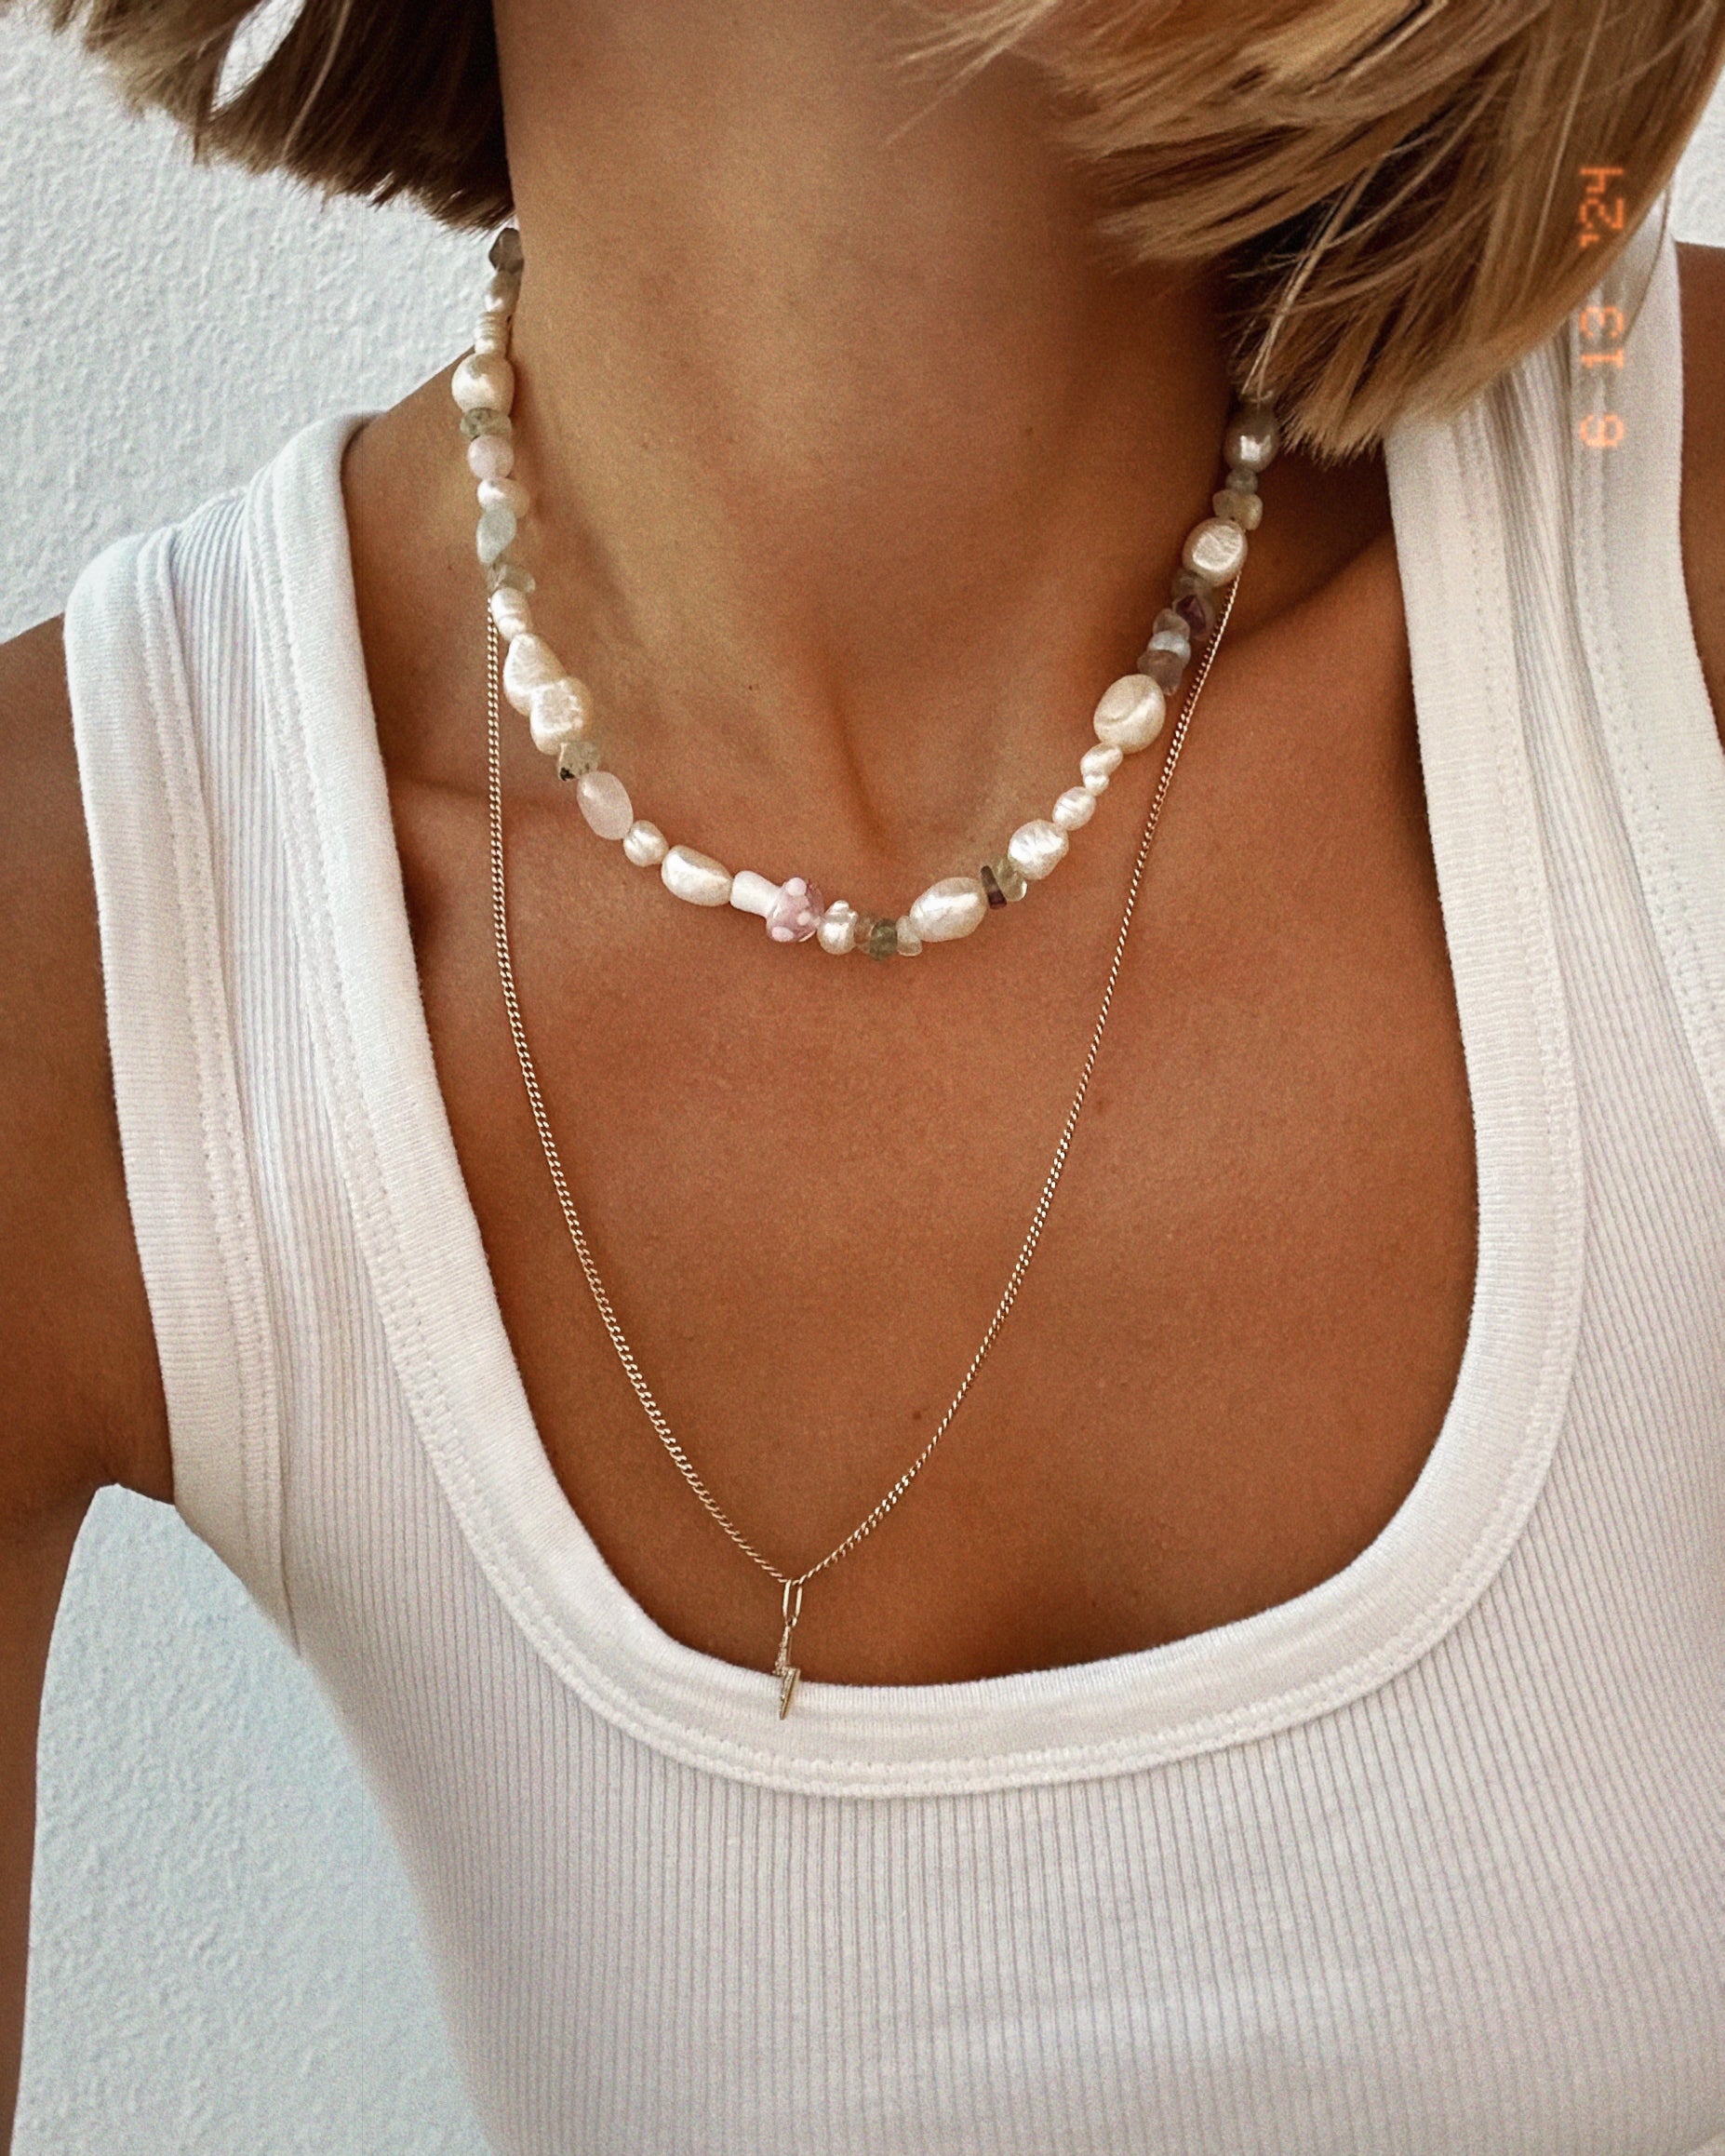 SUMMER necklace